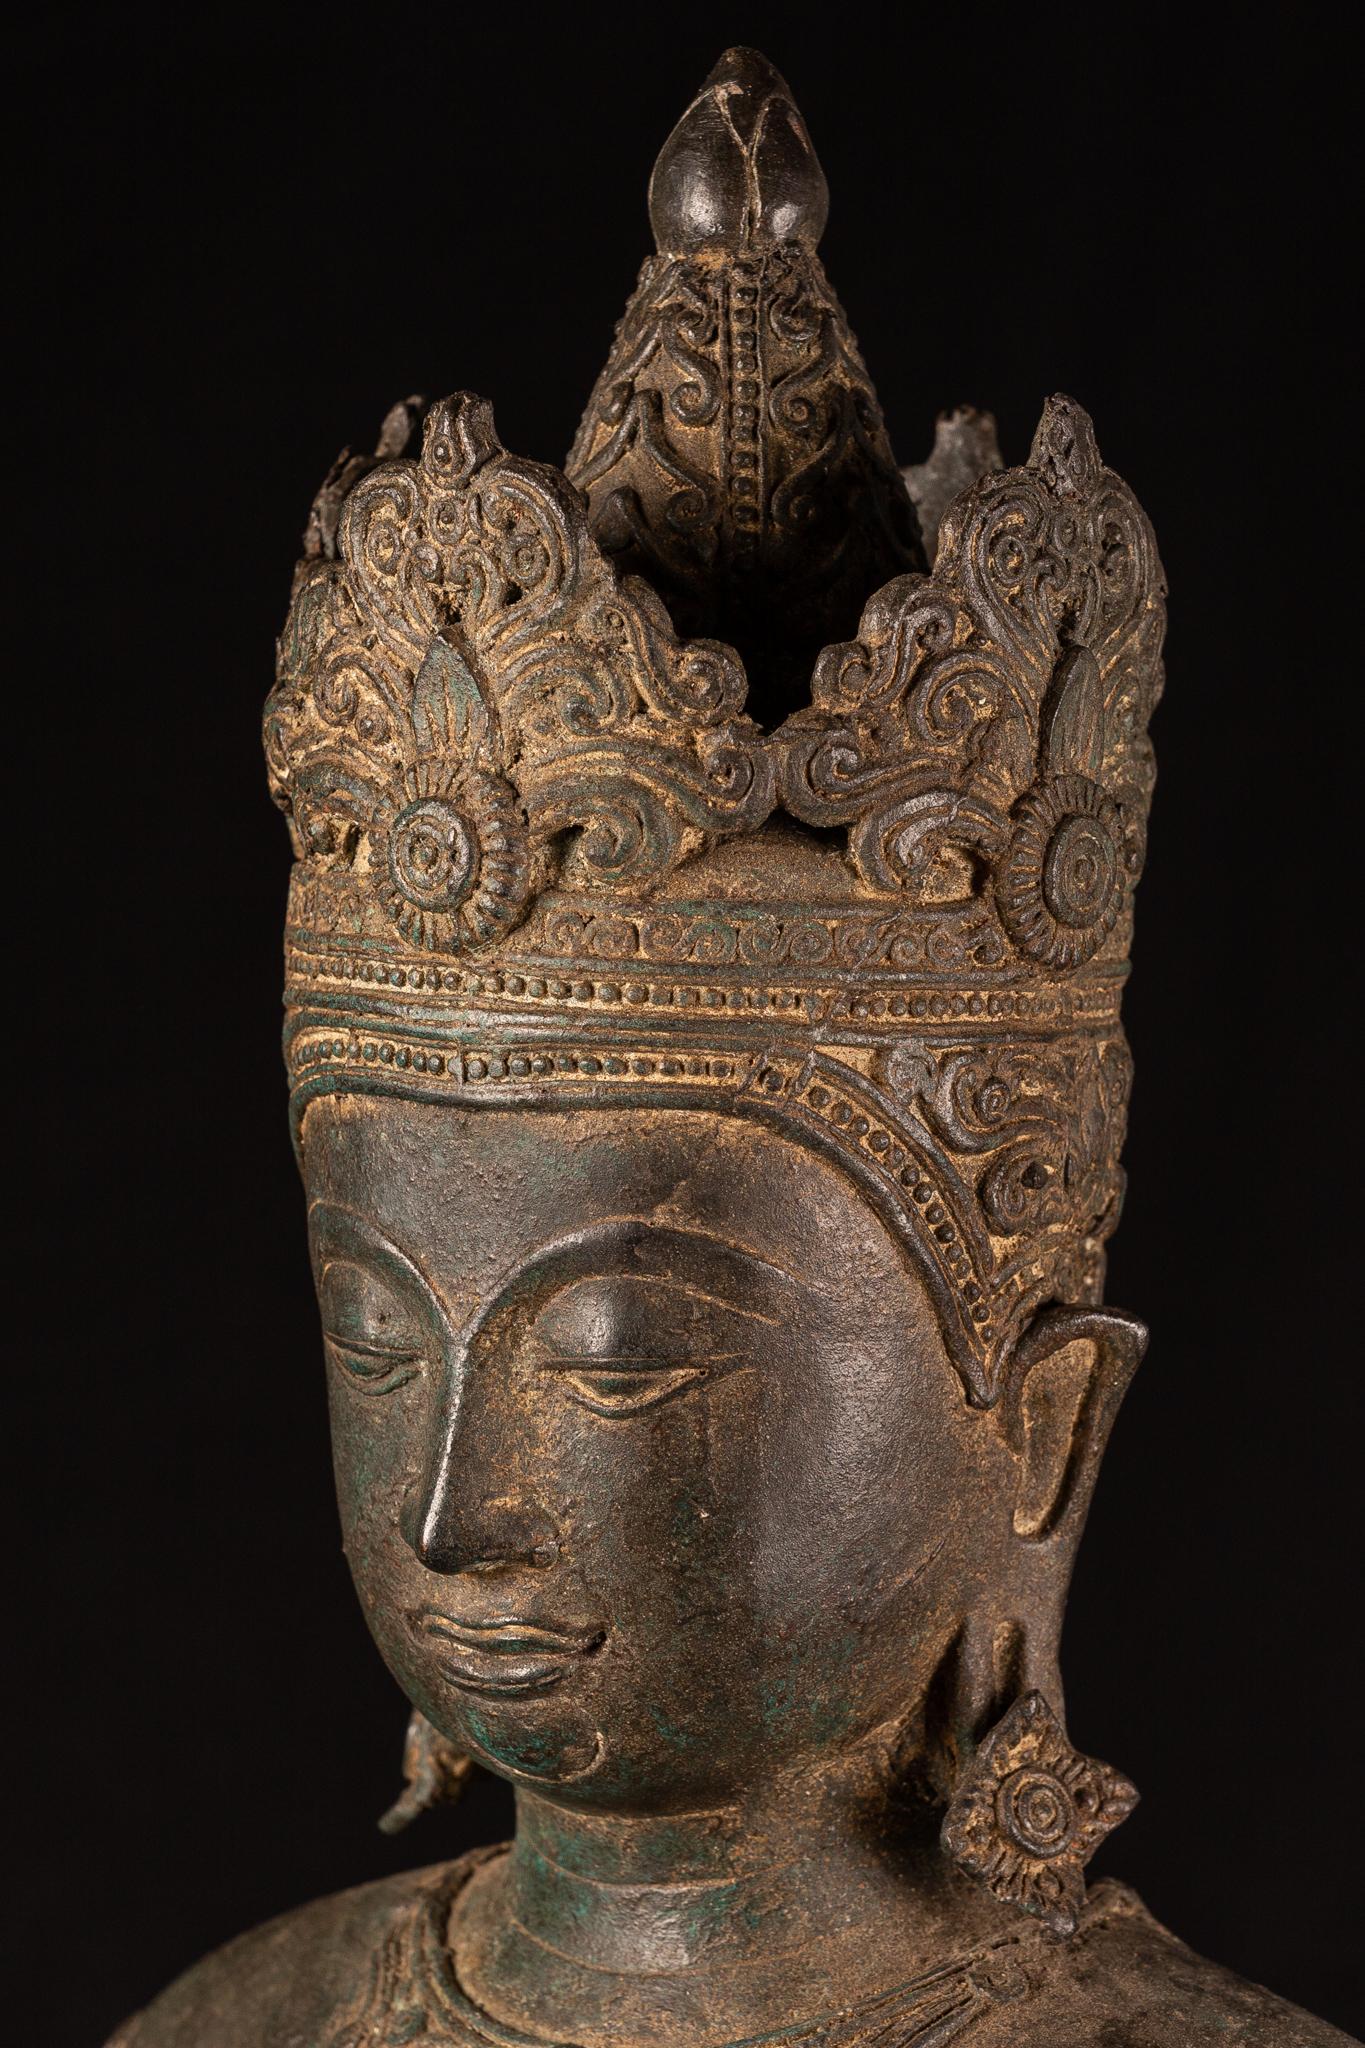 18th Century and Earlier Royal Antique Bronze Buddha with Imperial Attire, Fine Details, 18th Century